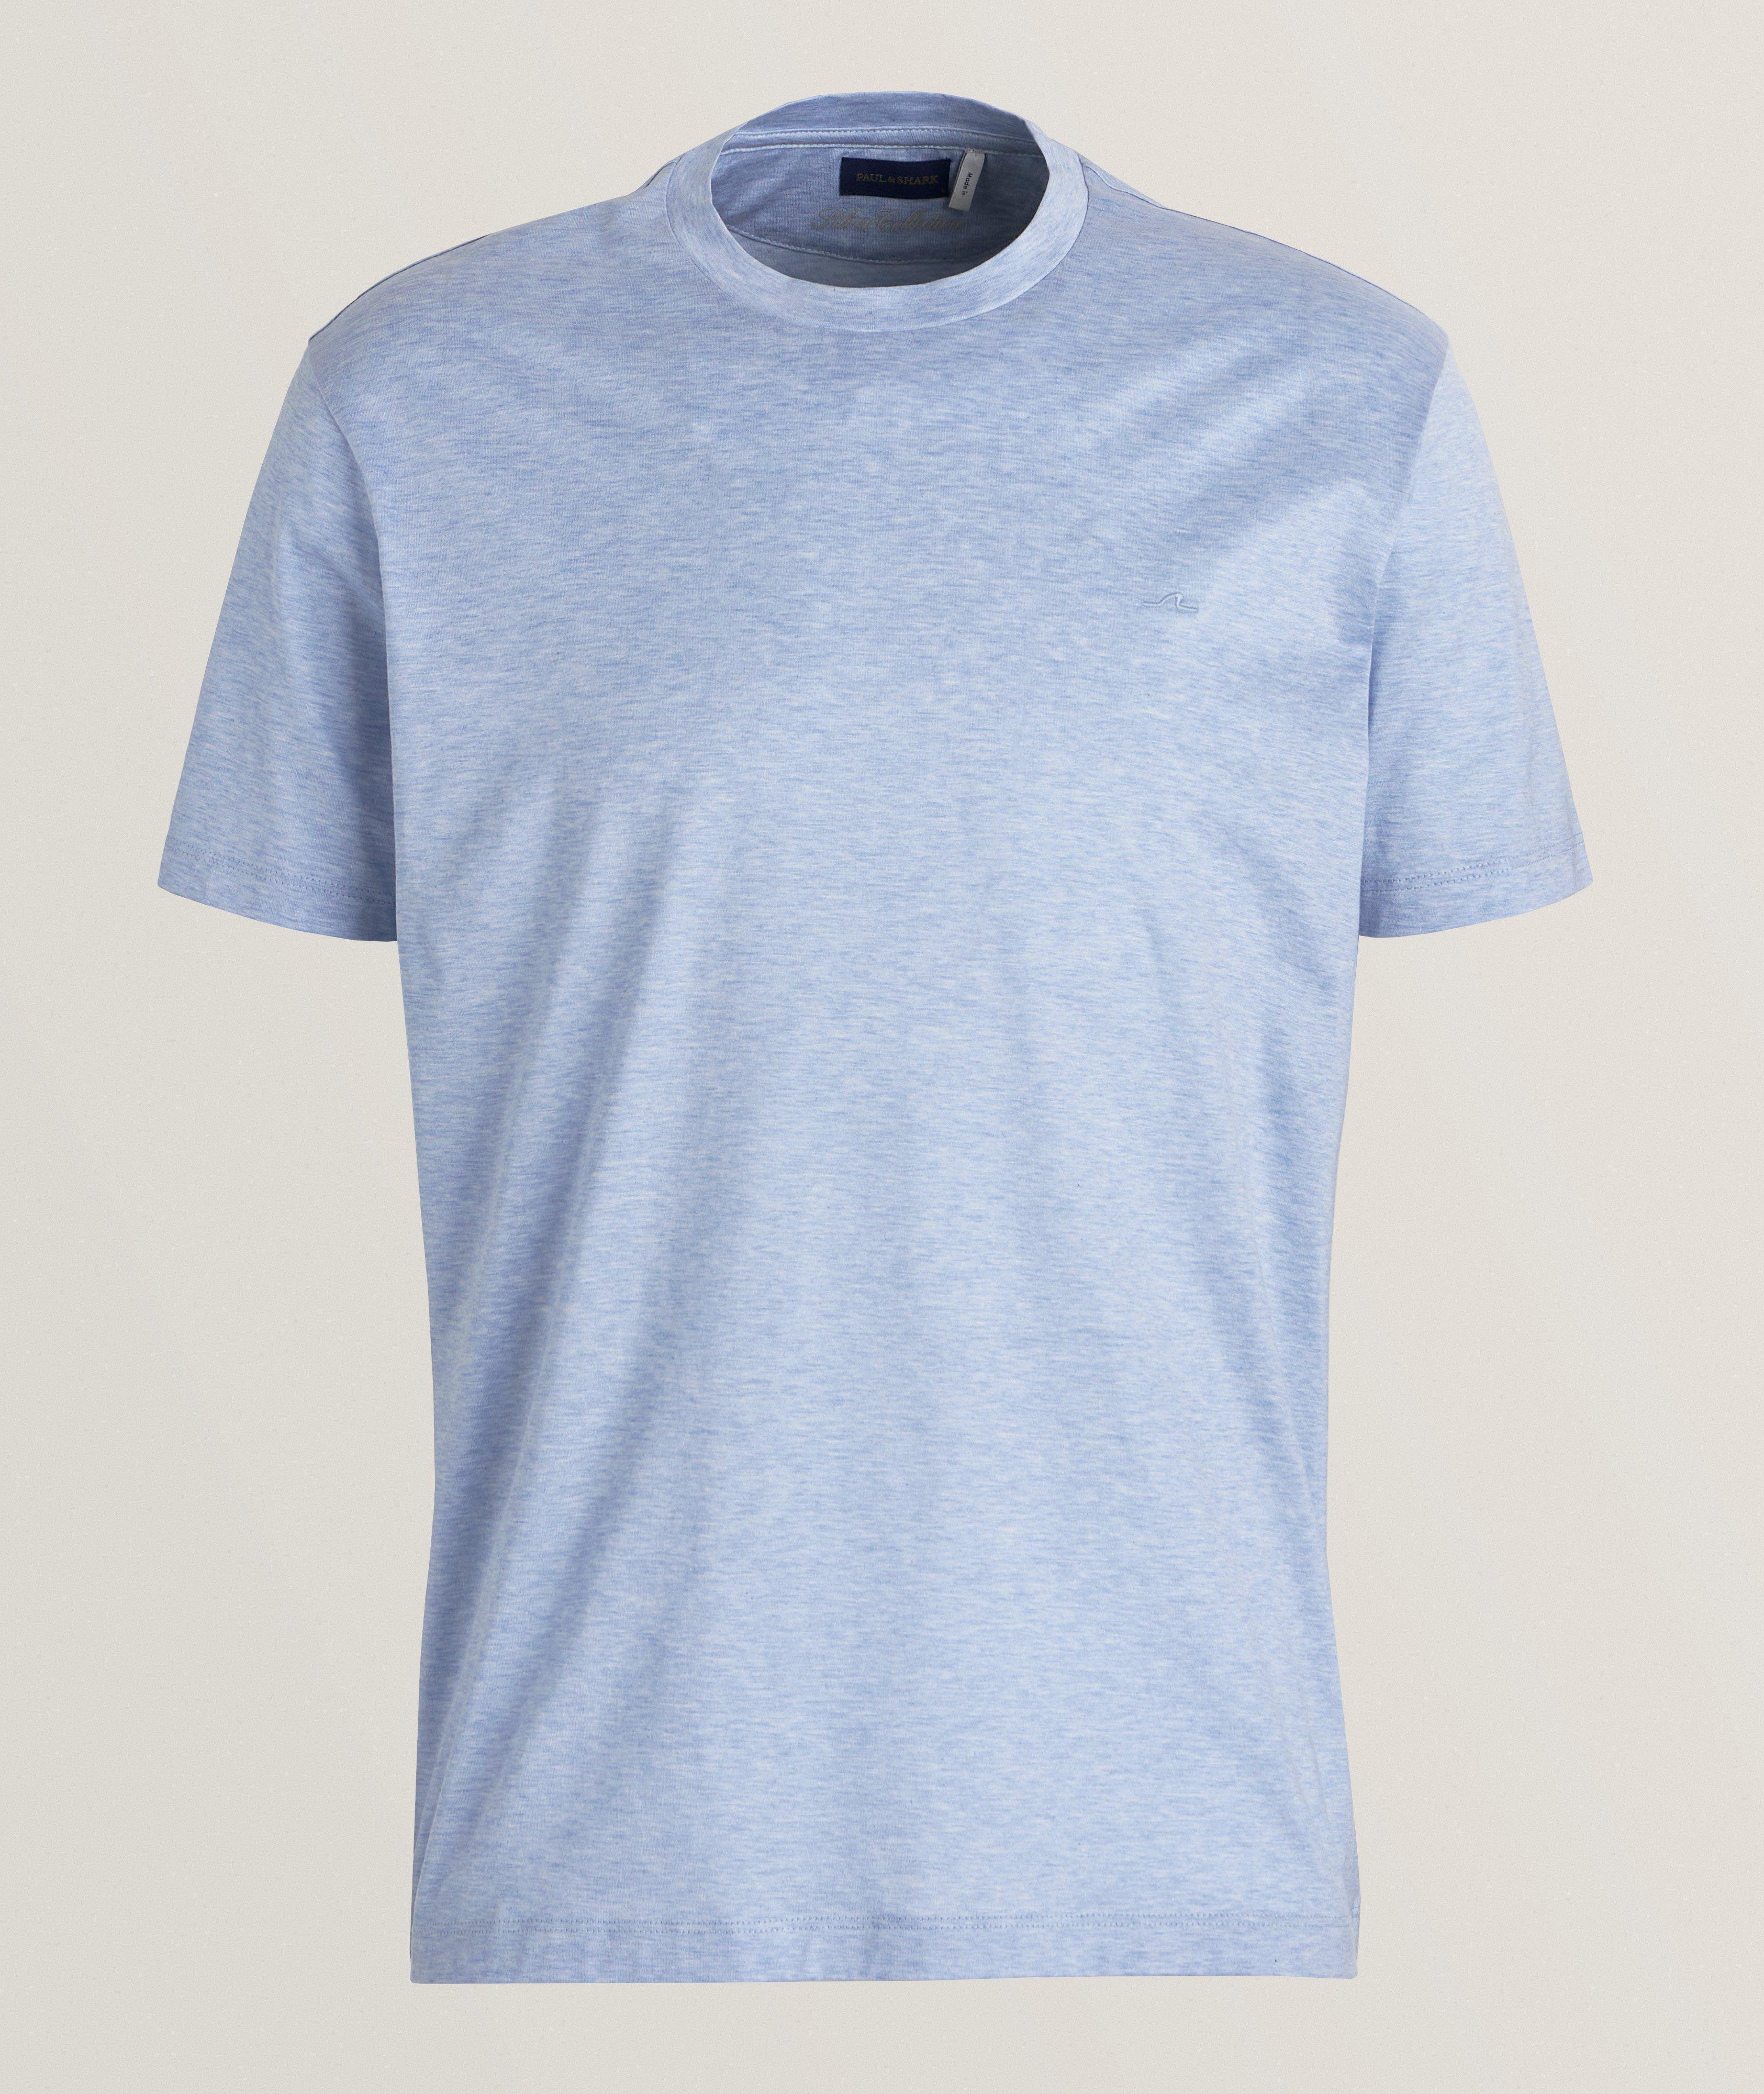 Silver Collection Garment Washed Jersey T-Shirt